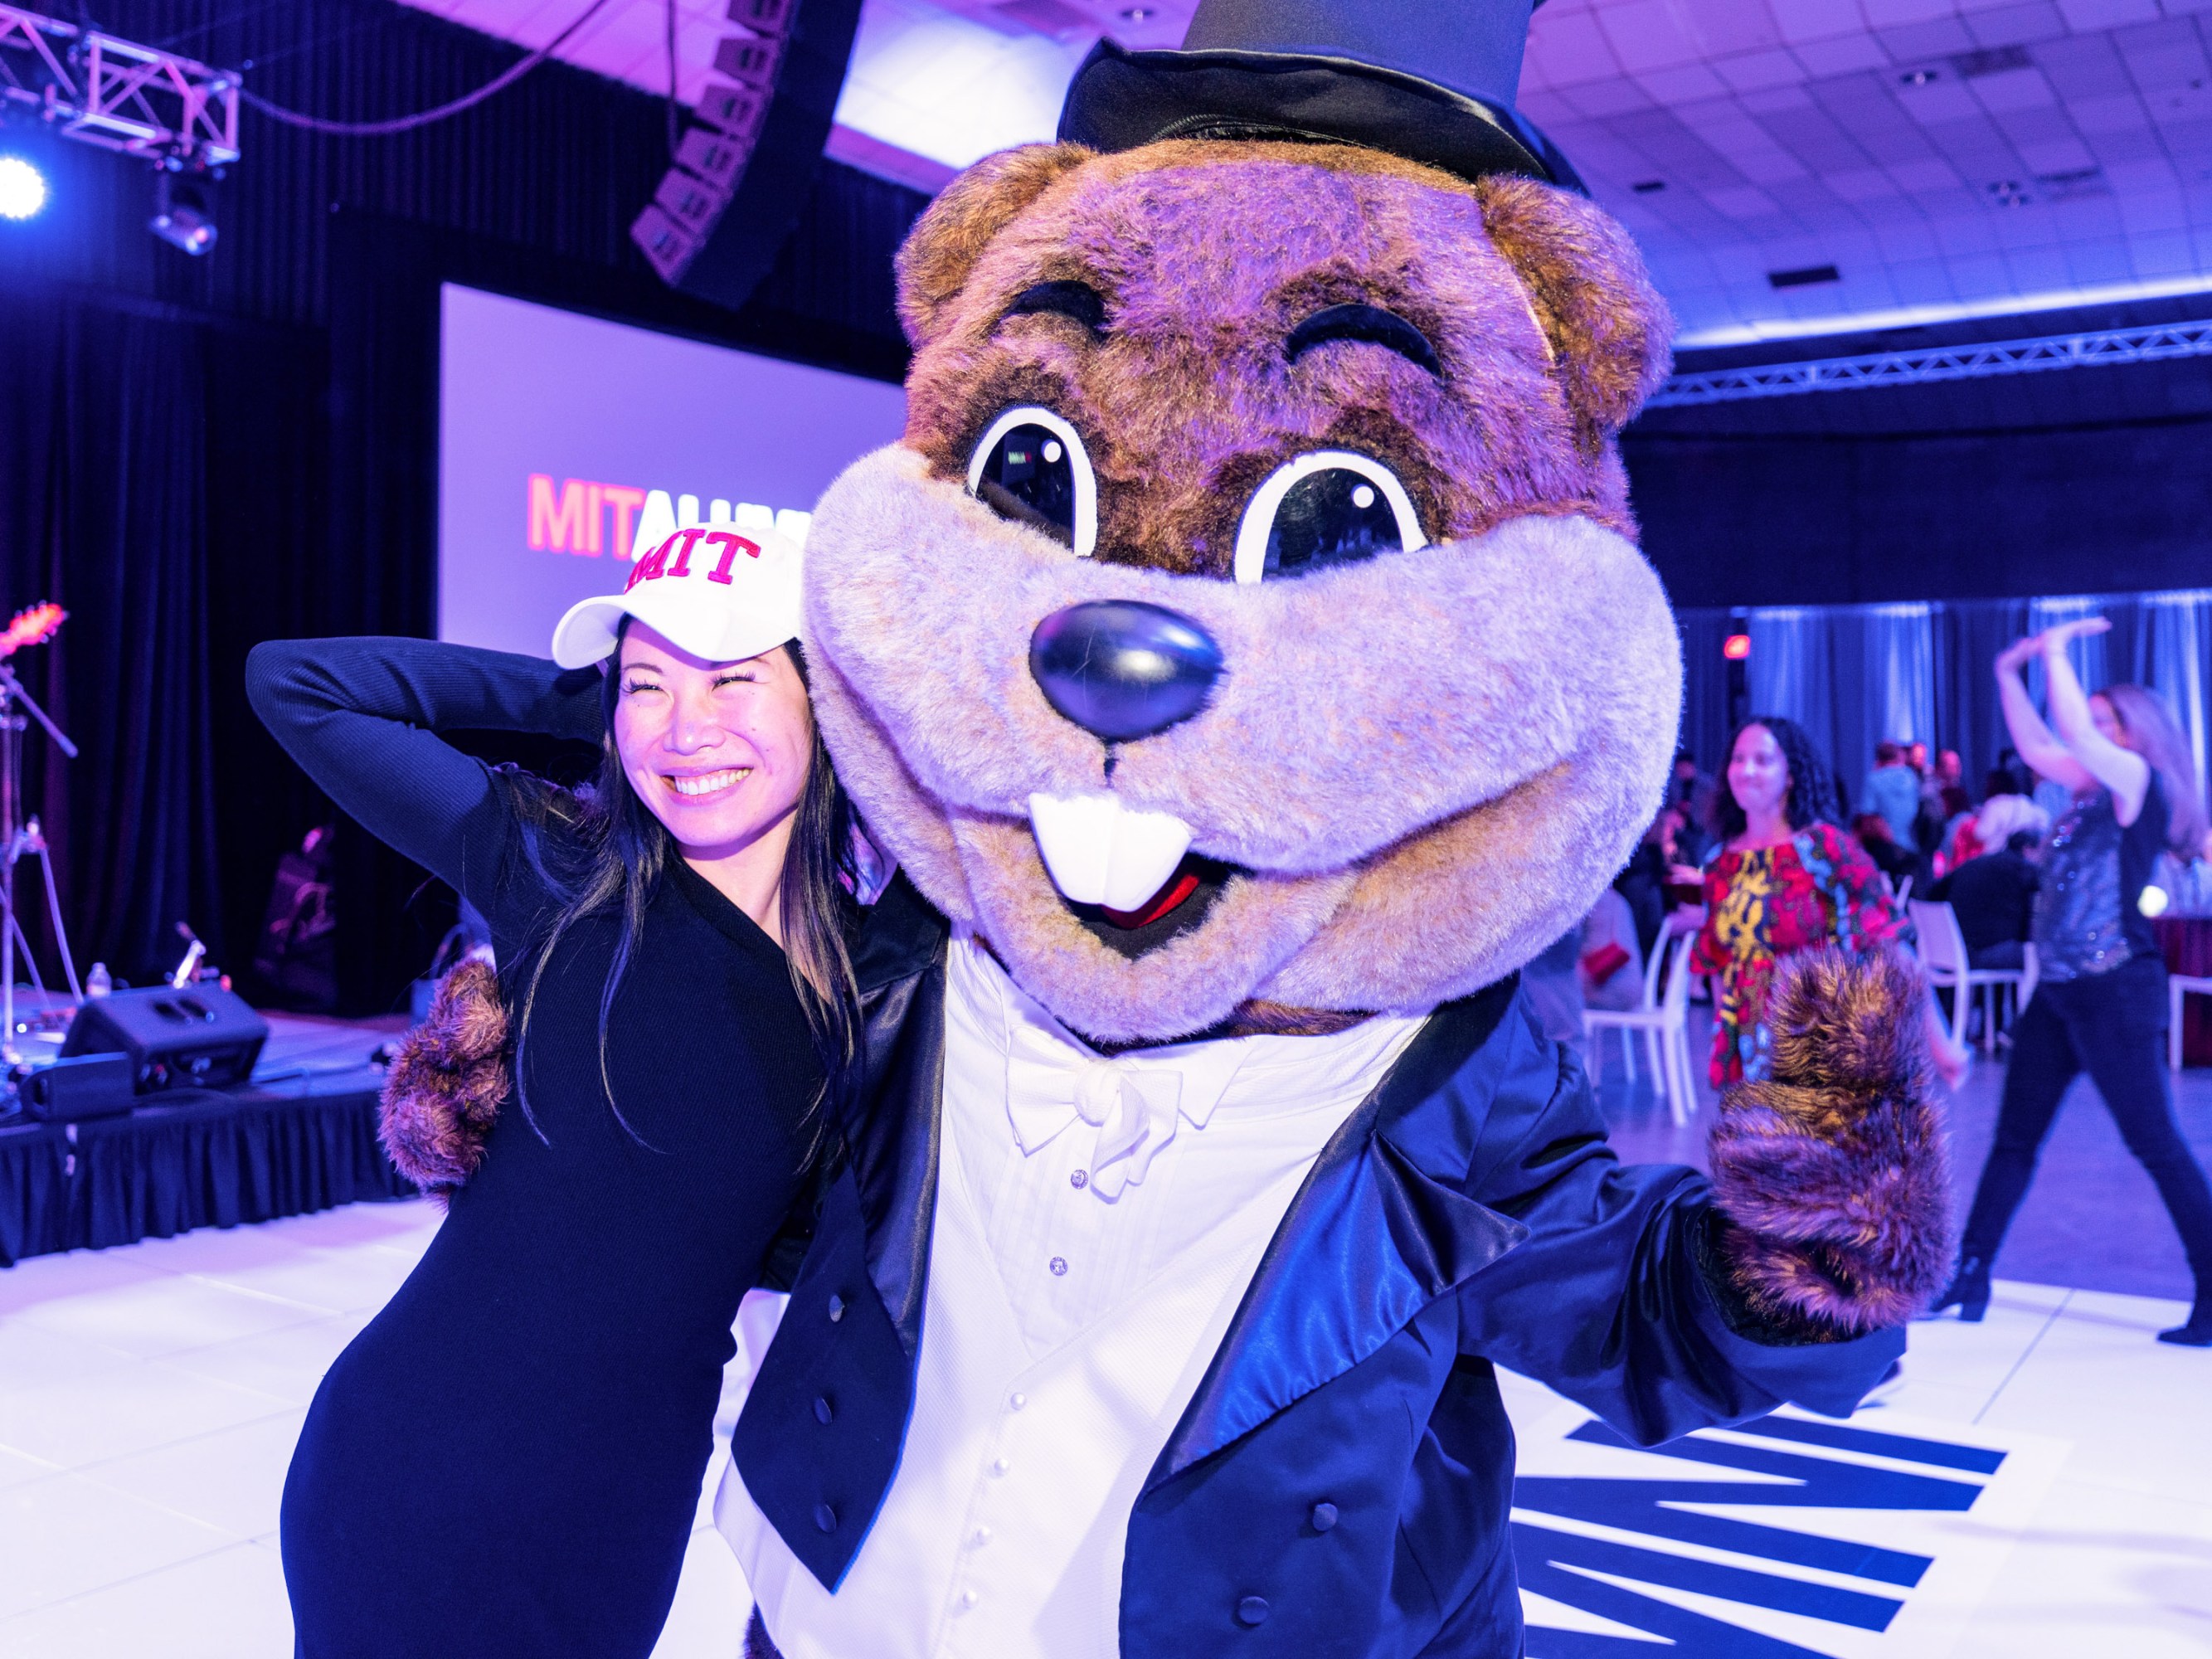 Alumni poses with Tim the Beaver